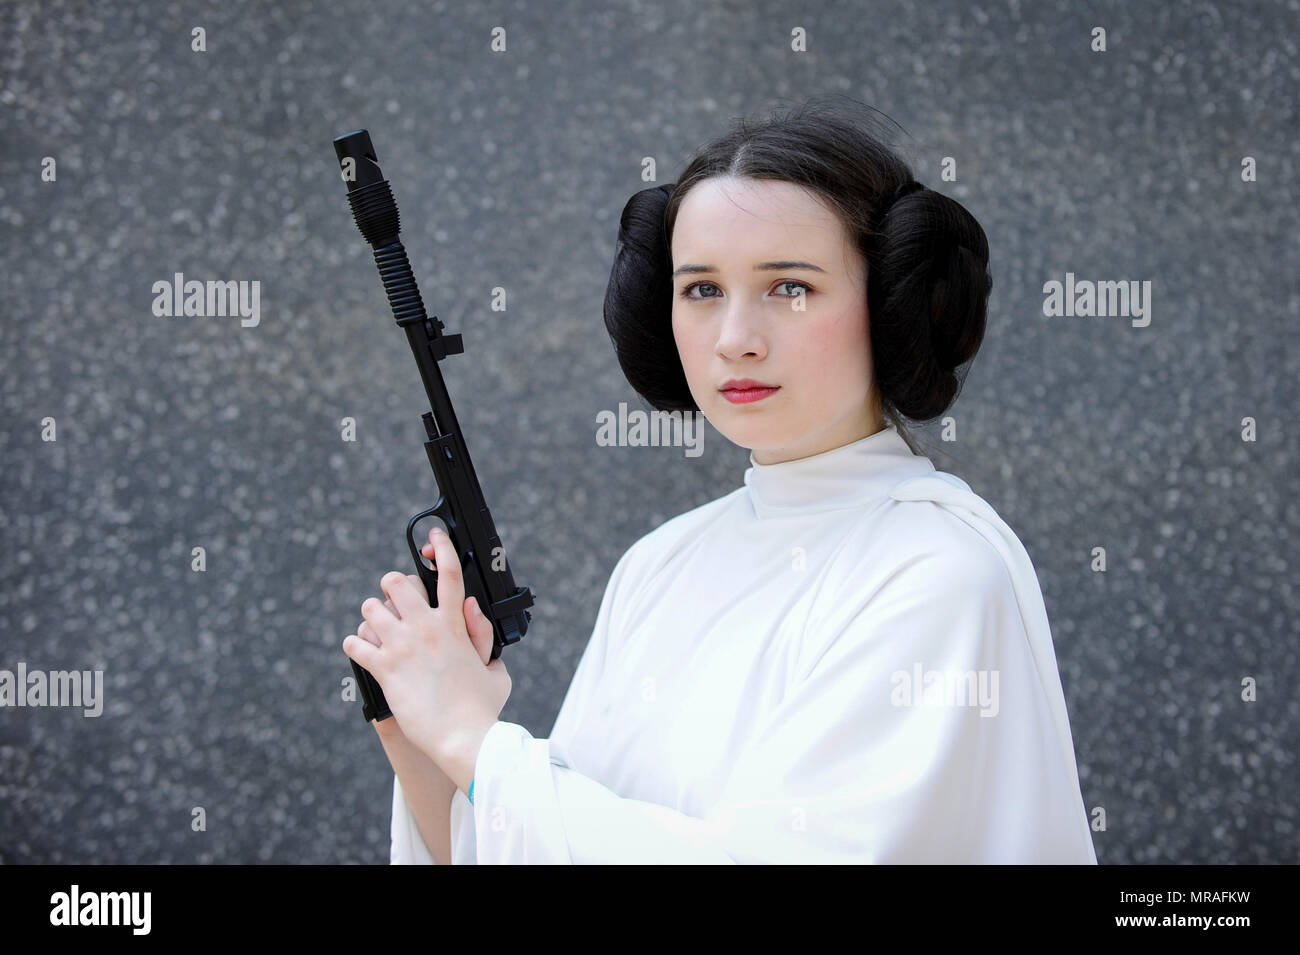 Page 3 - Princess Leia Stock Photography and Images - Alamy